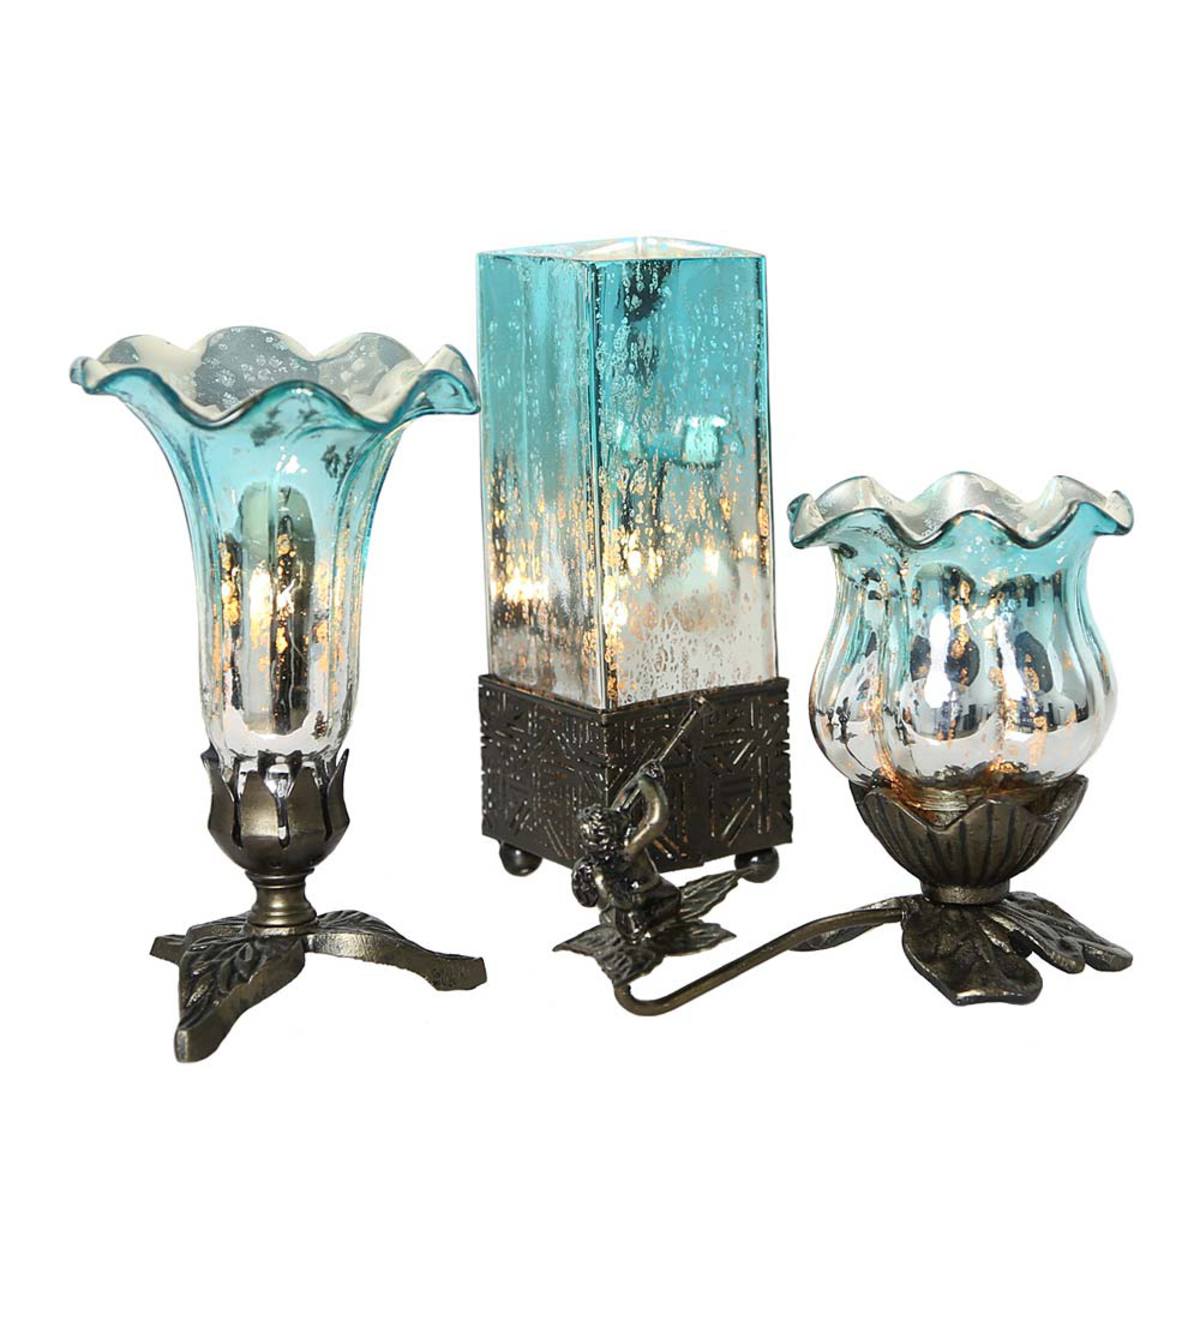 Mercury Glass Accent Lamps, Set of 3 - Teal/Silver